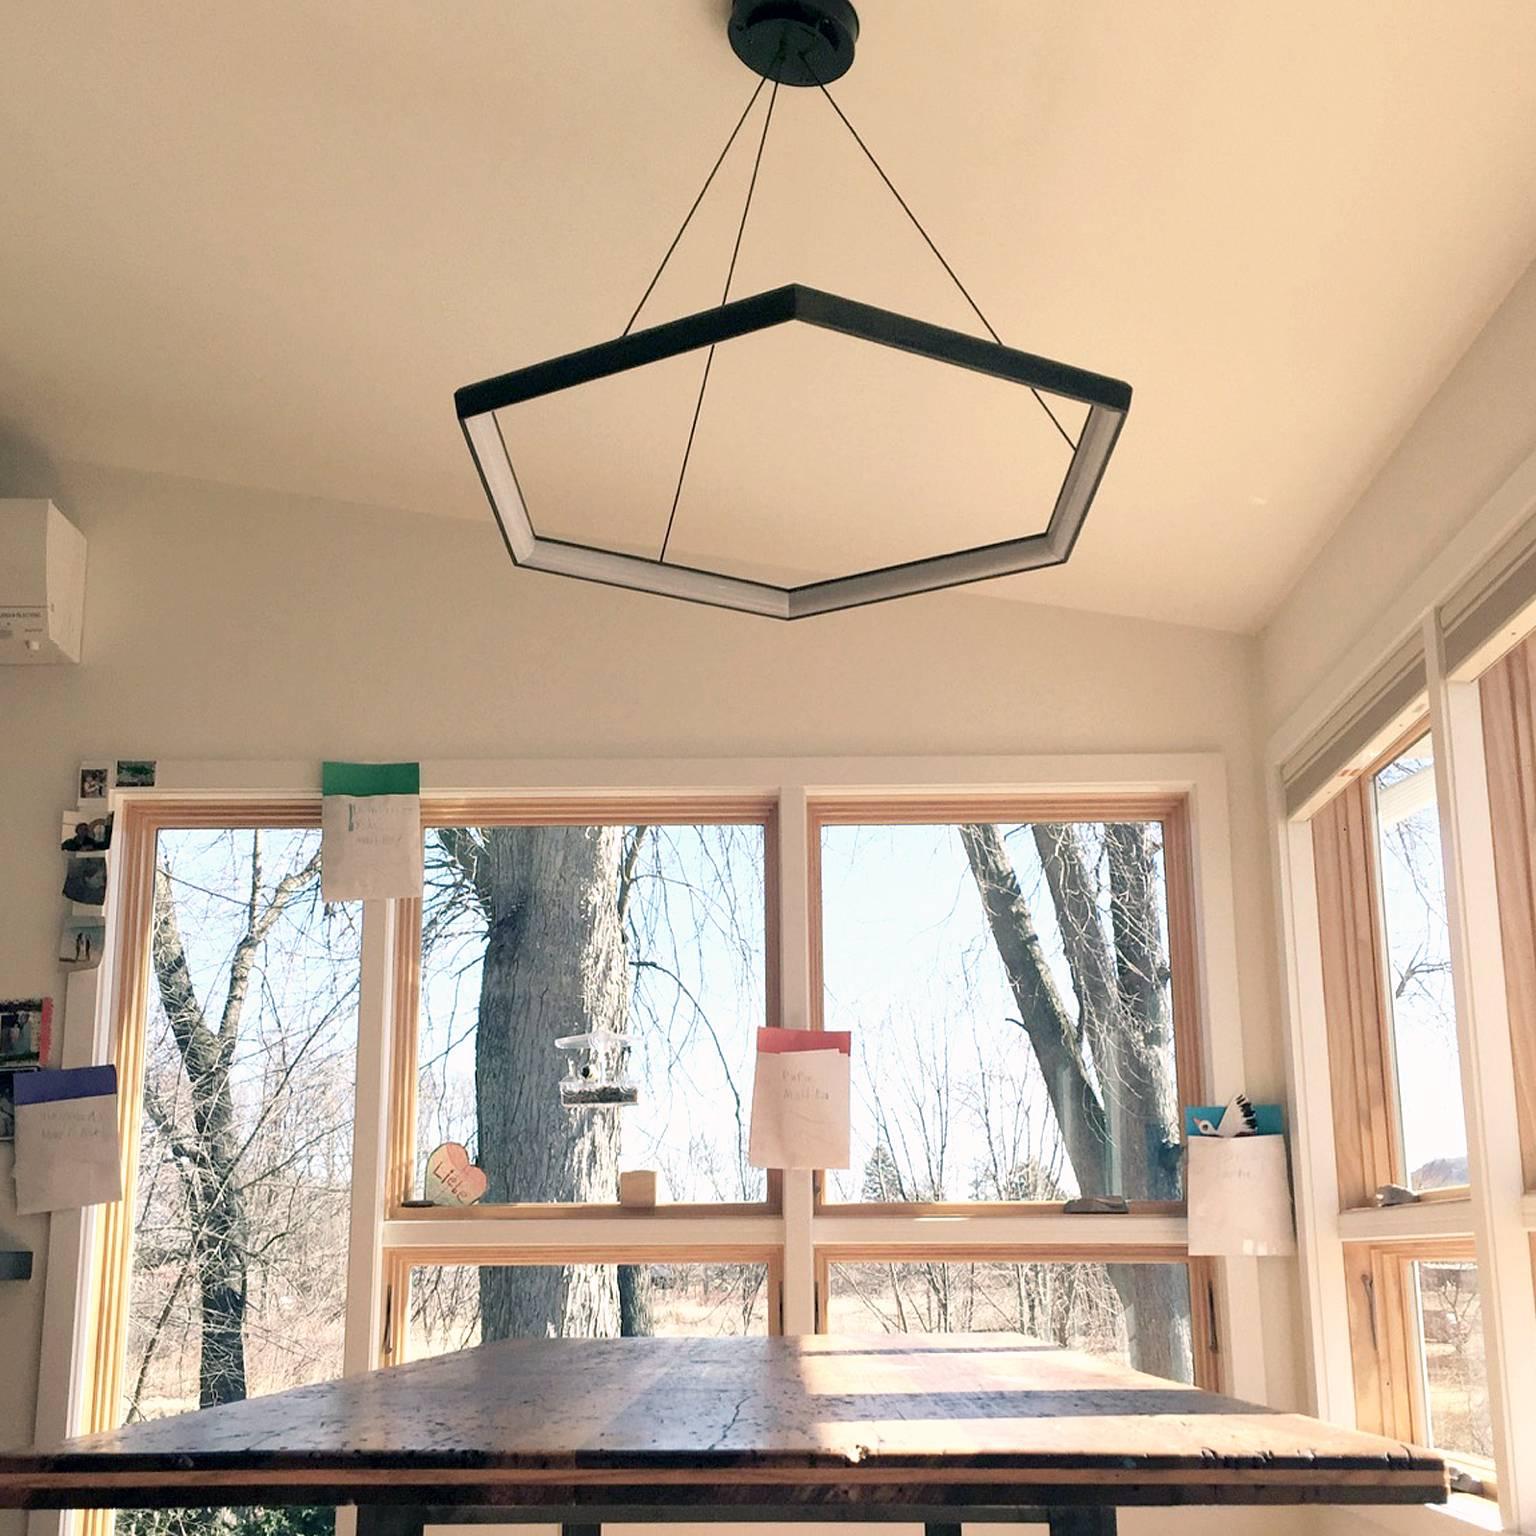 HEXIA HX34 Hexagon Geometric Modern LED Chandelier Light Fixture In New Condition For Sale In South El Monte, CA